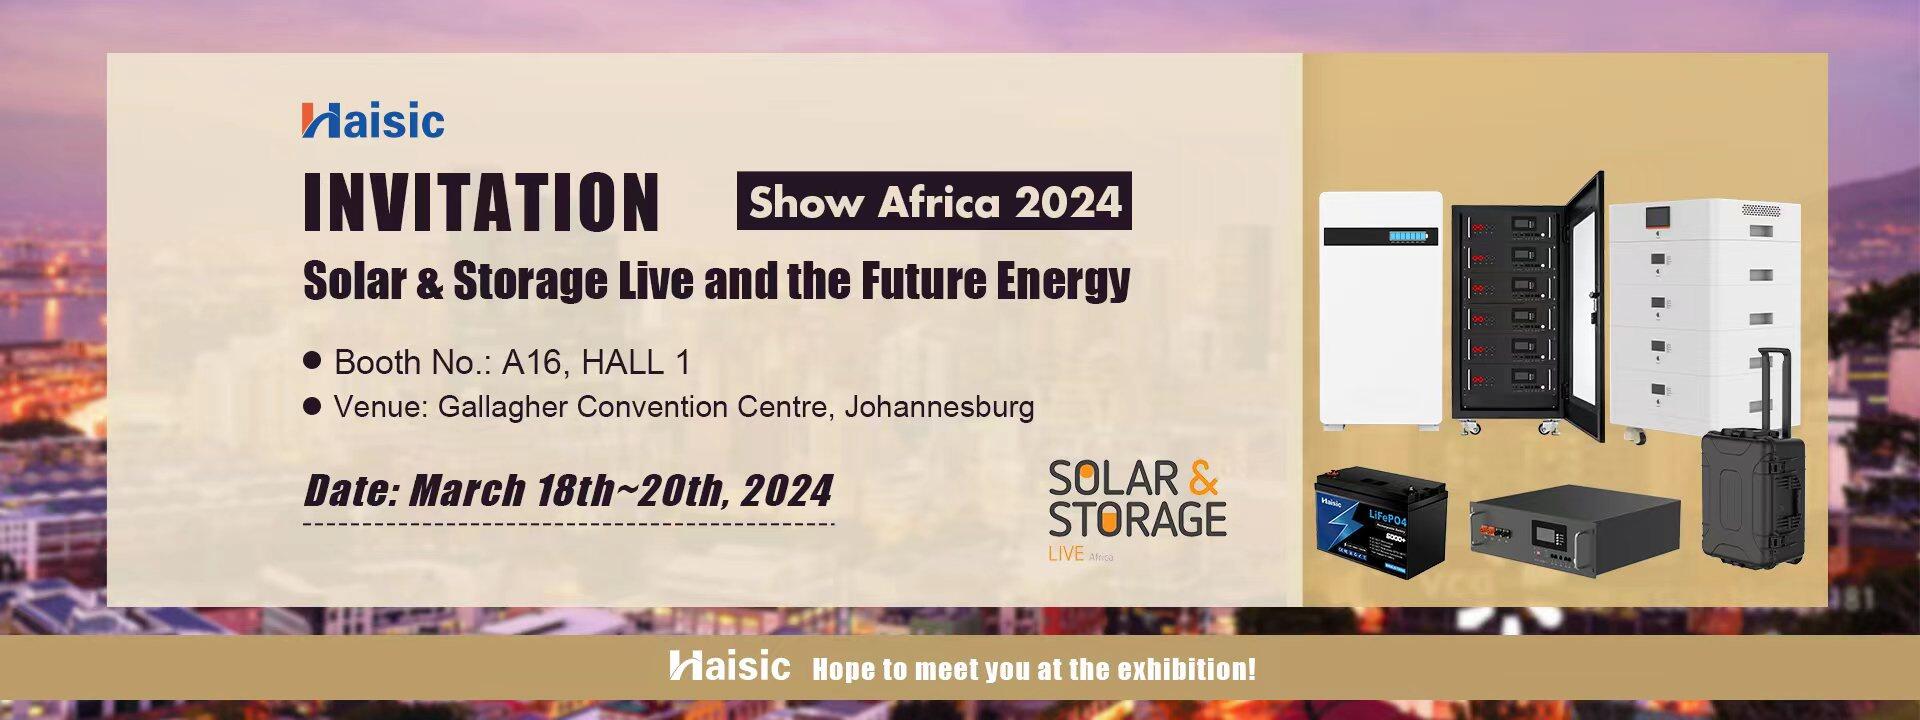 Solar & Storage Live and the Future Energy Show Africa 2024